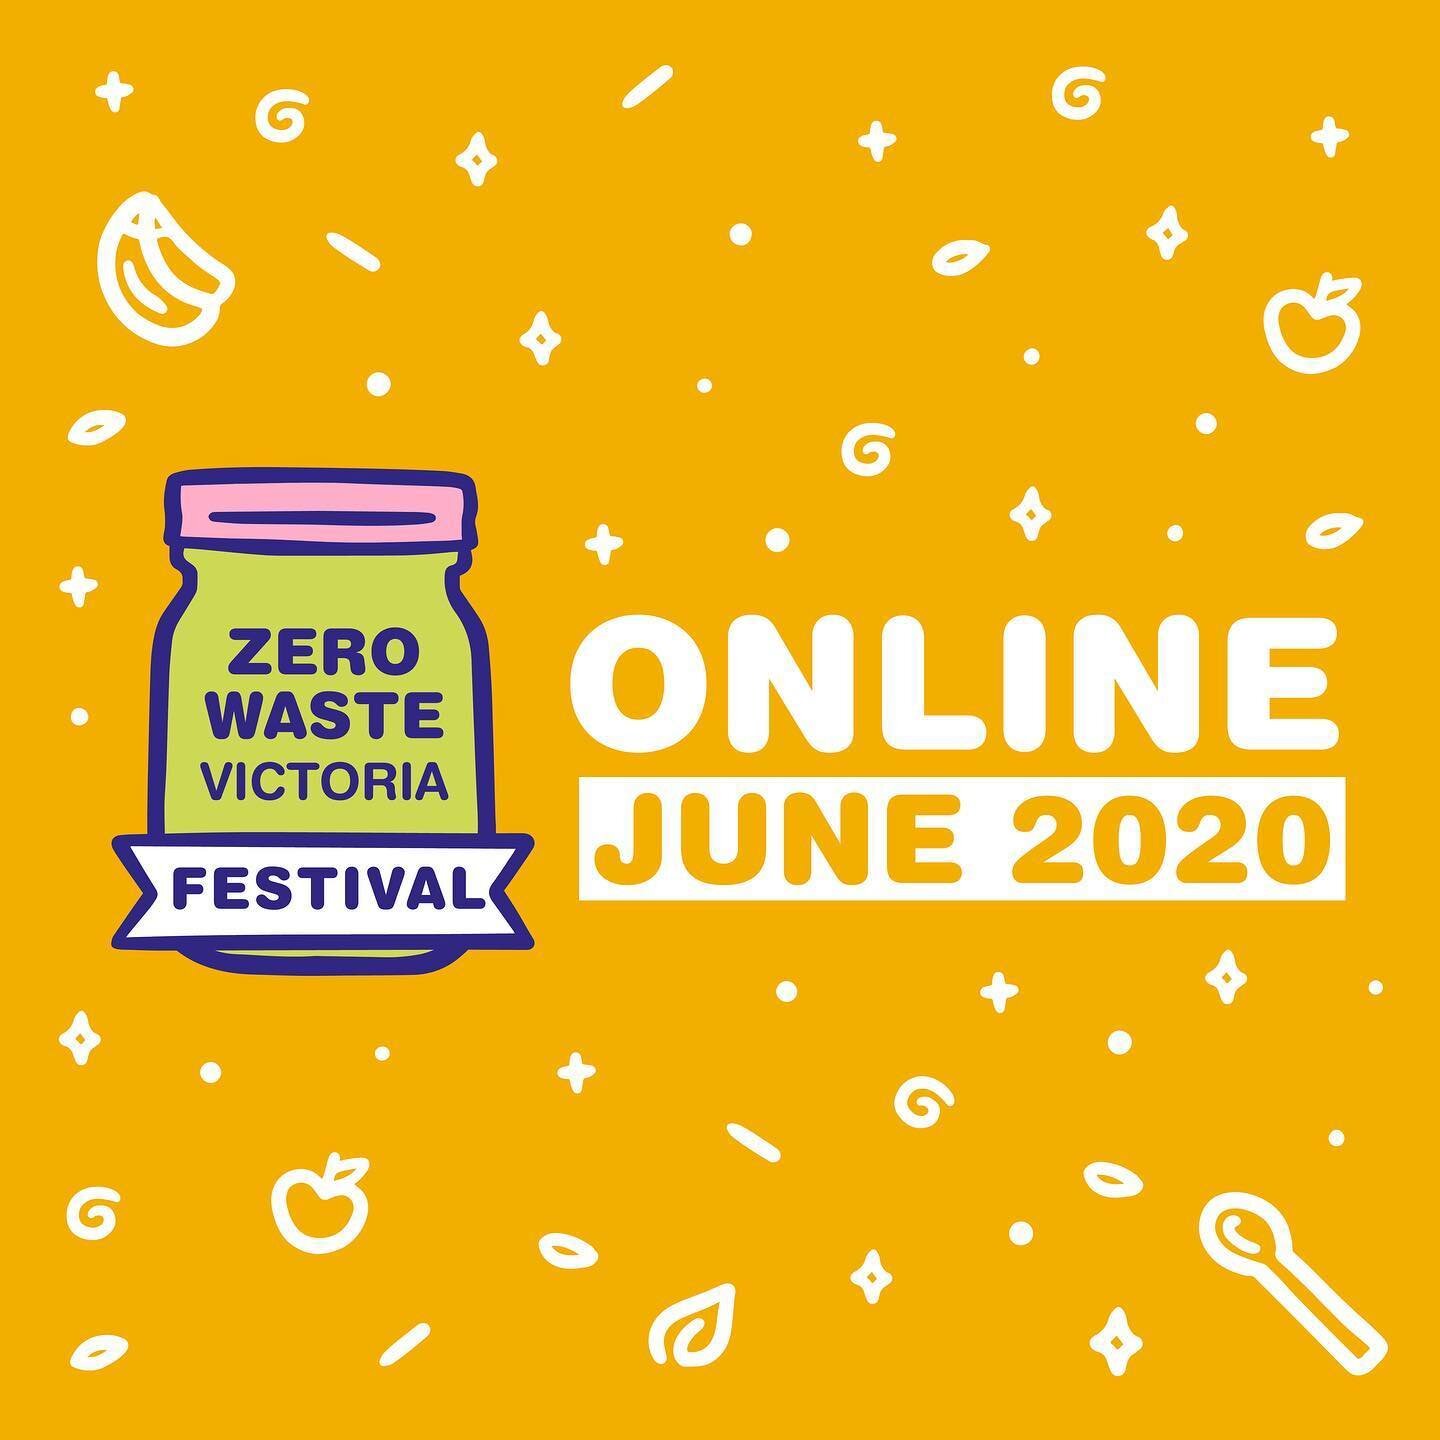 Coming up this June is Zero Waste Victoria online festival! The Zero Waste festival Online will bring together sustainable living professionals combining their unique skills and wisdom to design a less wasteful way of life. For the first time you can